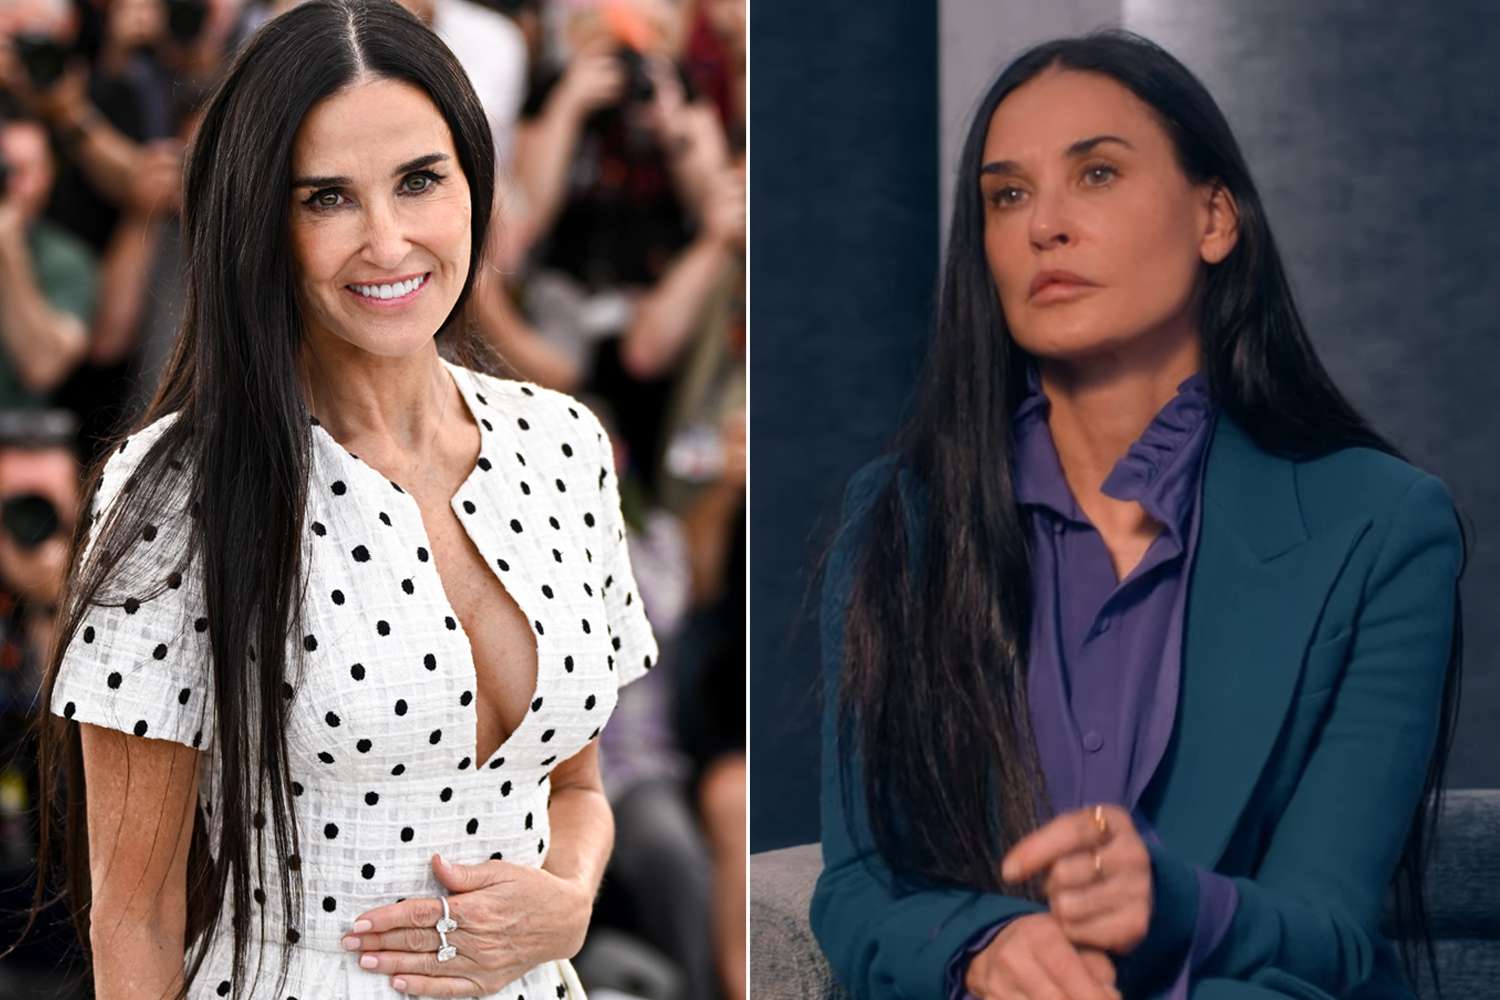 Demi Moore Recalls 'Very Vulnerable Experience' of Filming Full-Frontal Nude Scenes for “The Substance”